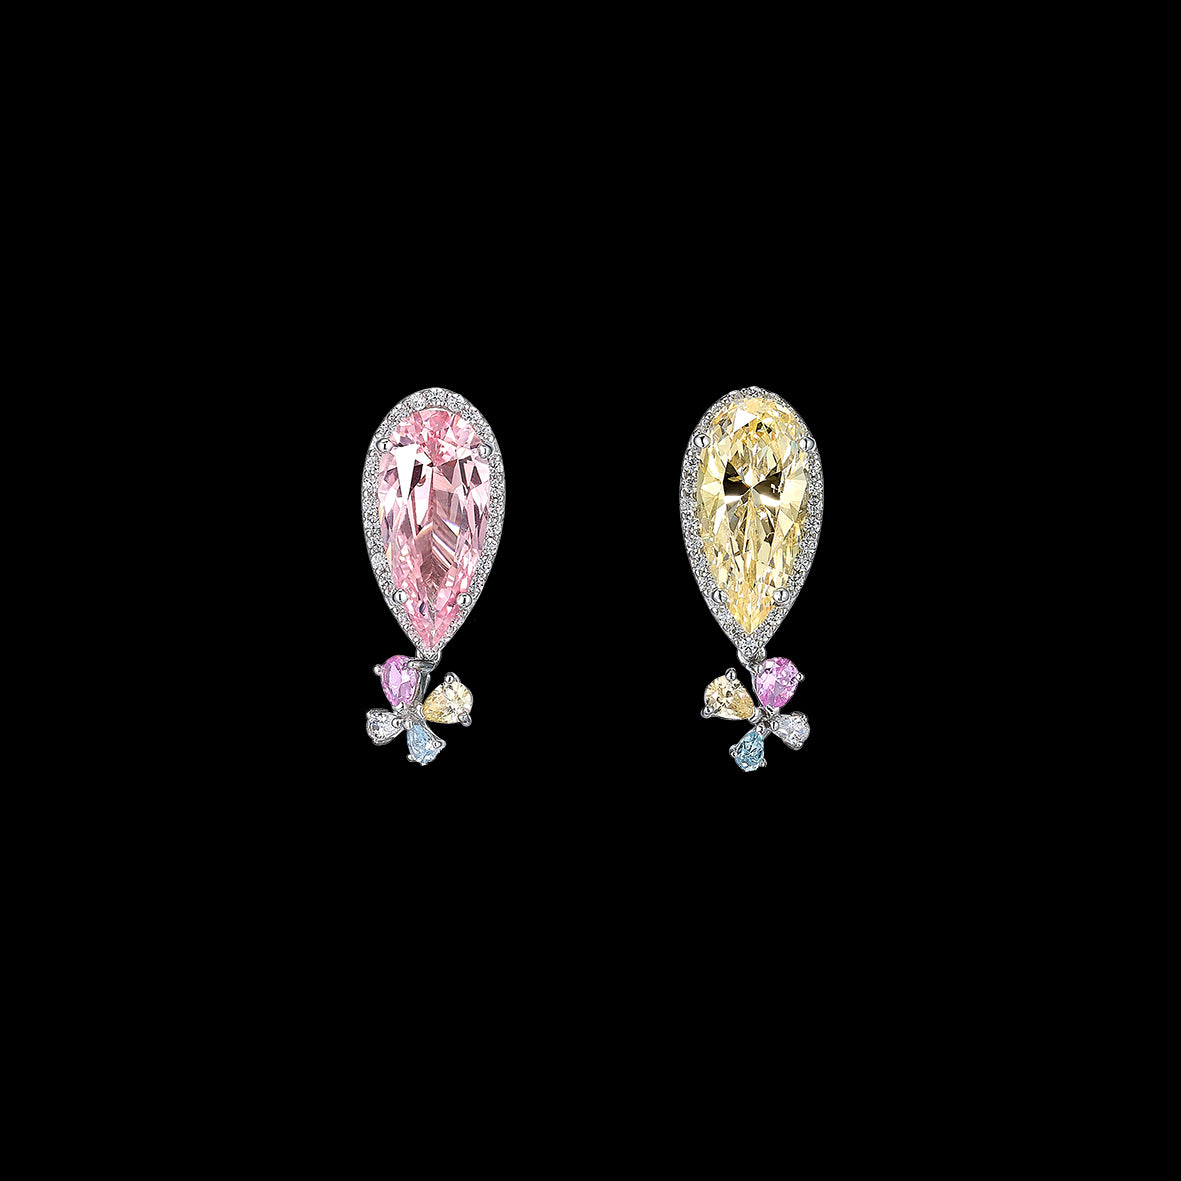 Candy Papillon Earrings, Earrings, Anabela Chan Joaillerie - Fine jewelry with laboratory grown and created gemstones hand-crafted in the United Kingdom. Anabela Chan Joaillerie is the first fine jewellery brand in the world to champion laboratory-grown and created gemstones with high jewellery design, artisanal craftsmanship and a focus on ethical and sustainable innovations.